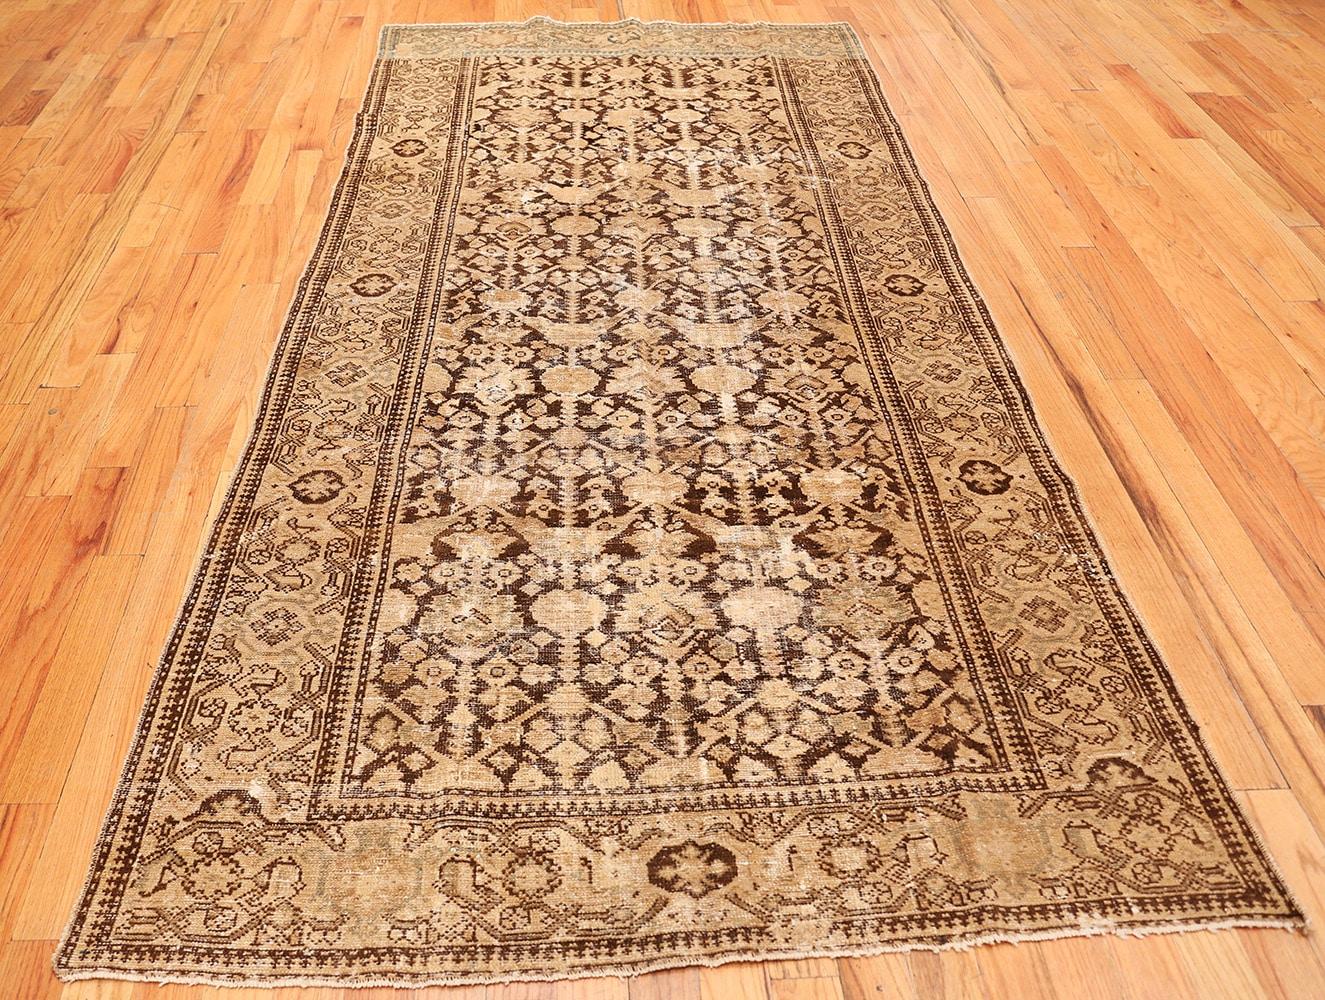 20th Century Antique Persian Malayer Carpet. Size: 4 ft 10 in x 9 ft 8 in (1.47 m x 2.95 m)